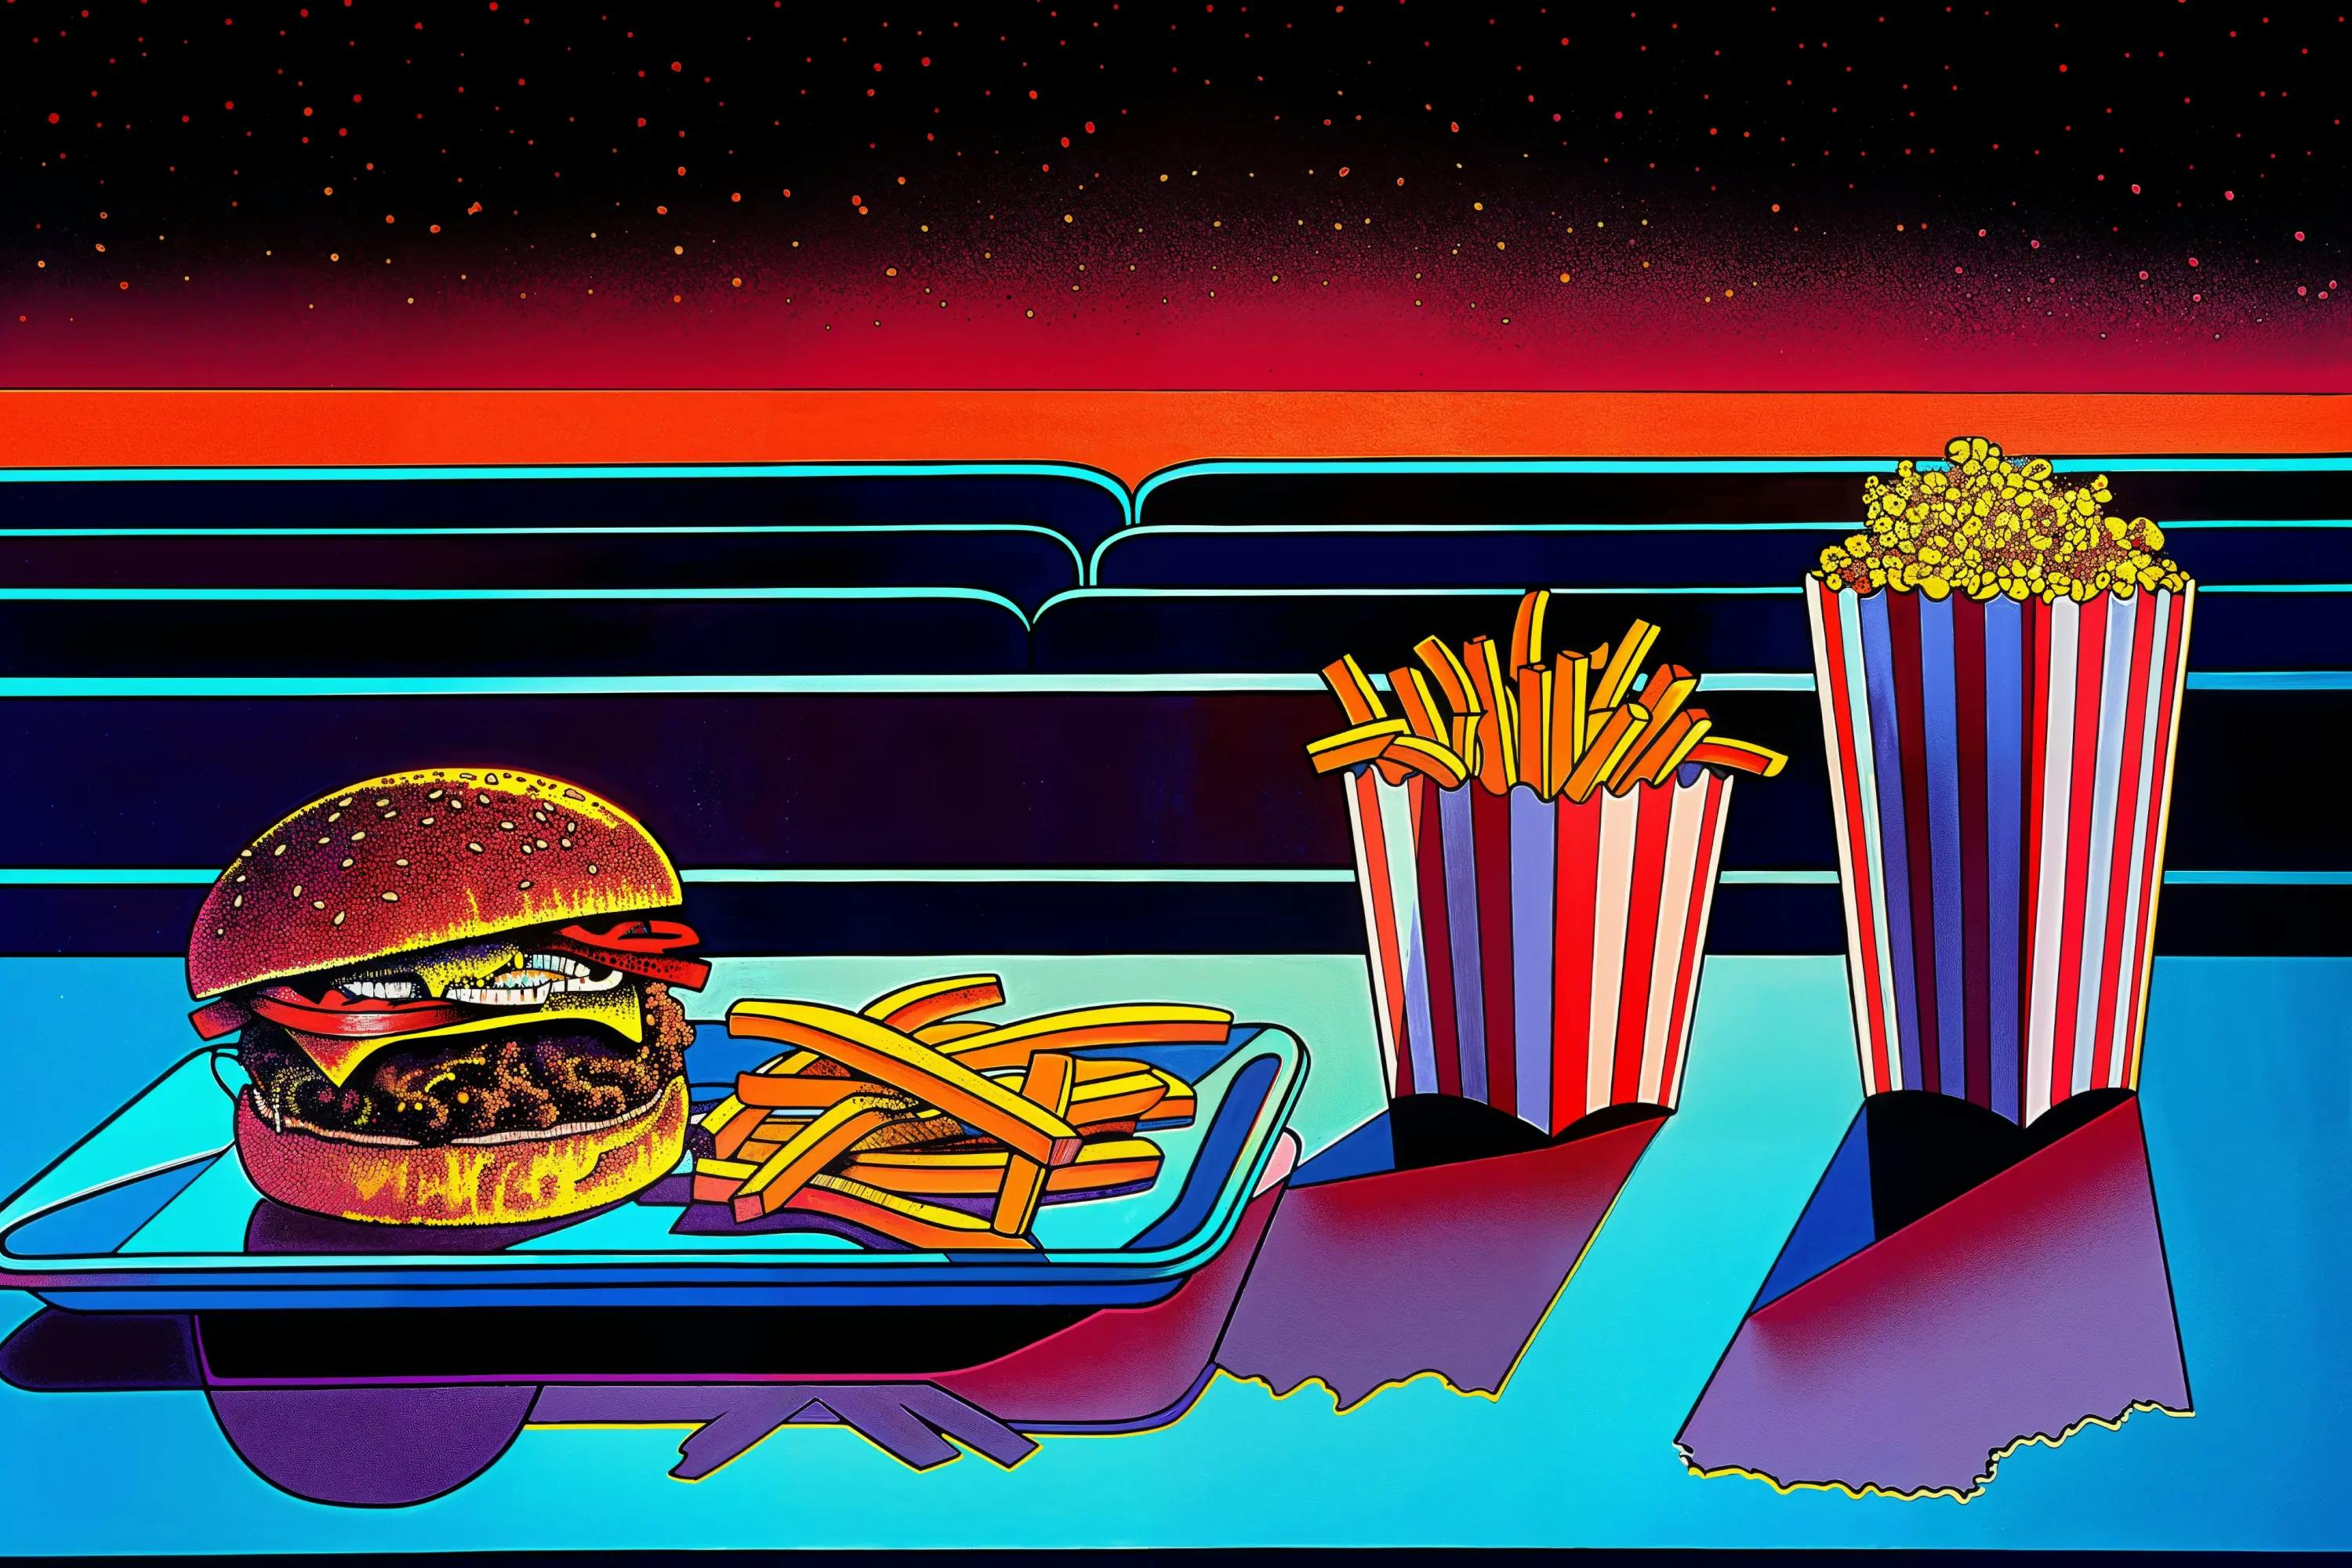 Stylized illustration of a burger, fries, and popcorn on a table in a movie theater